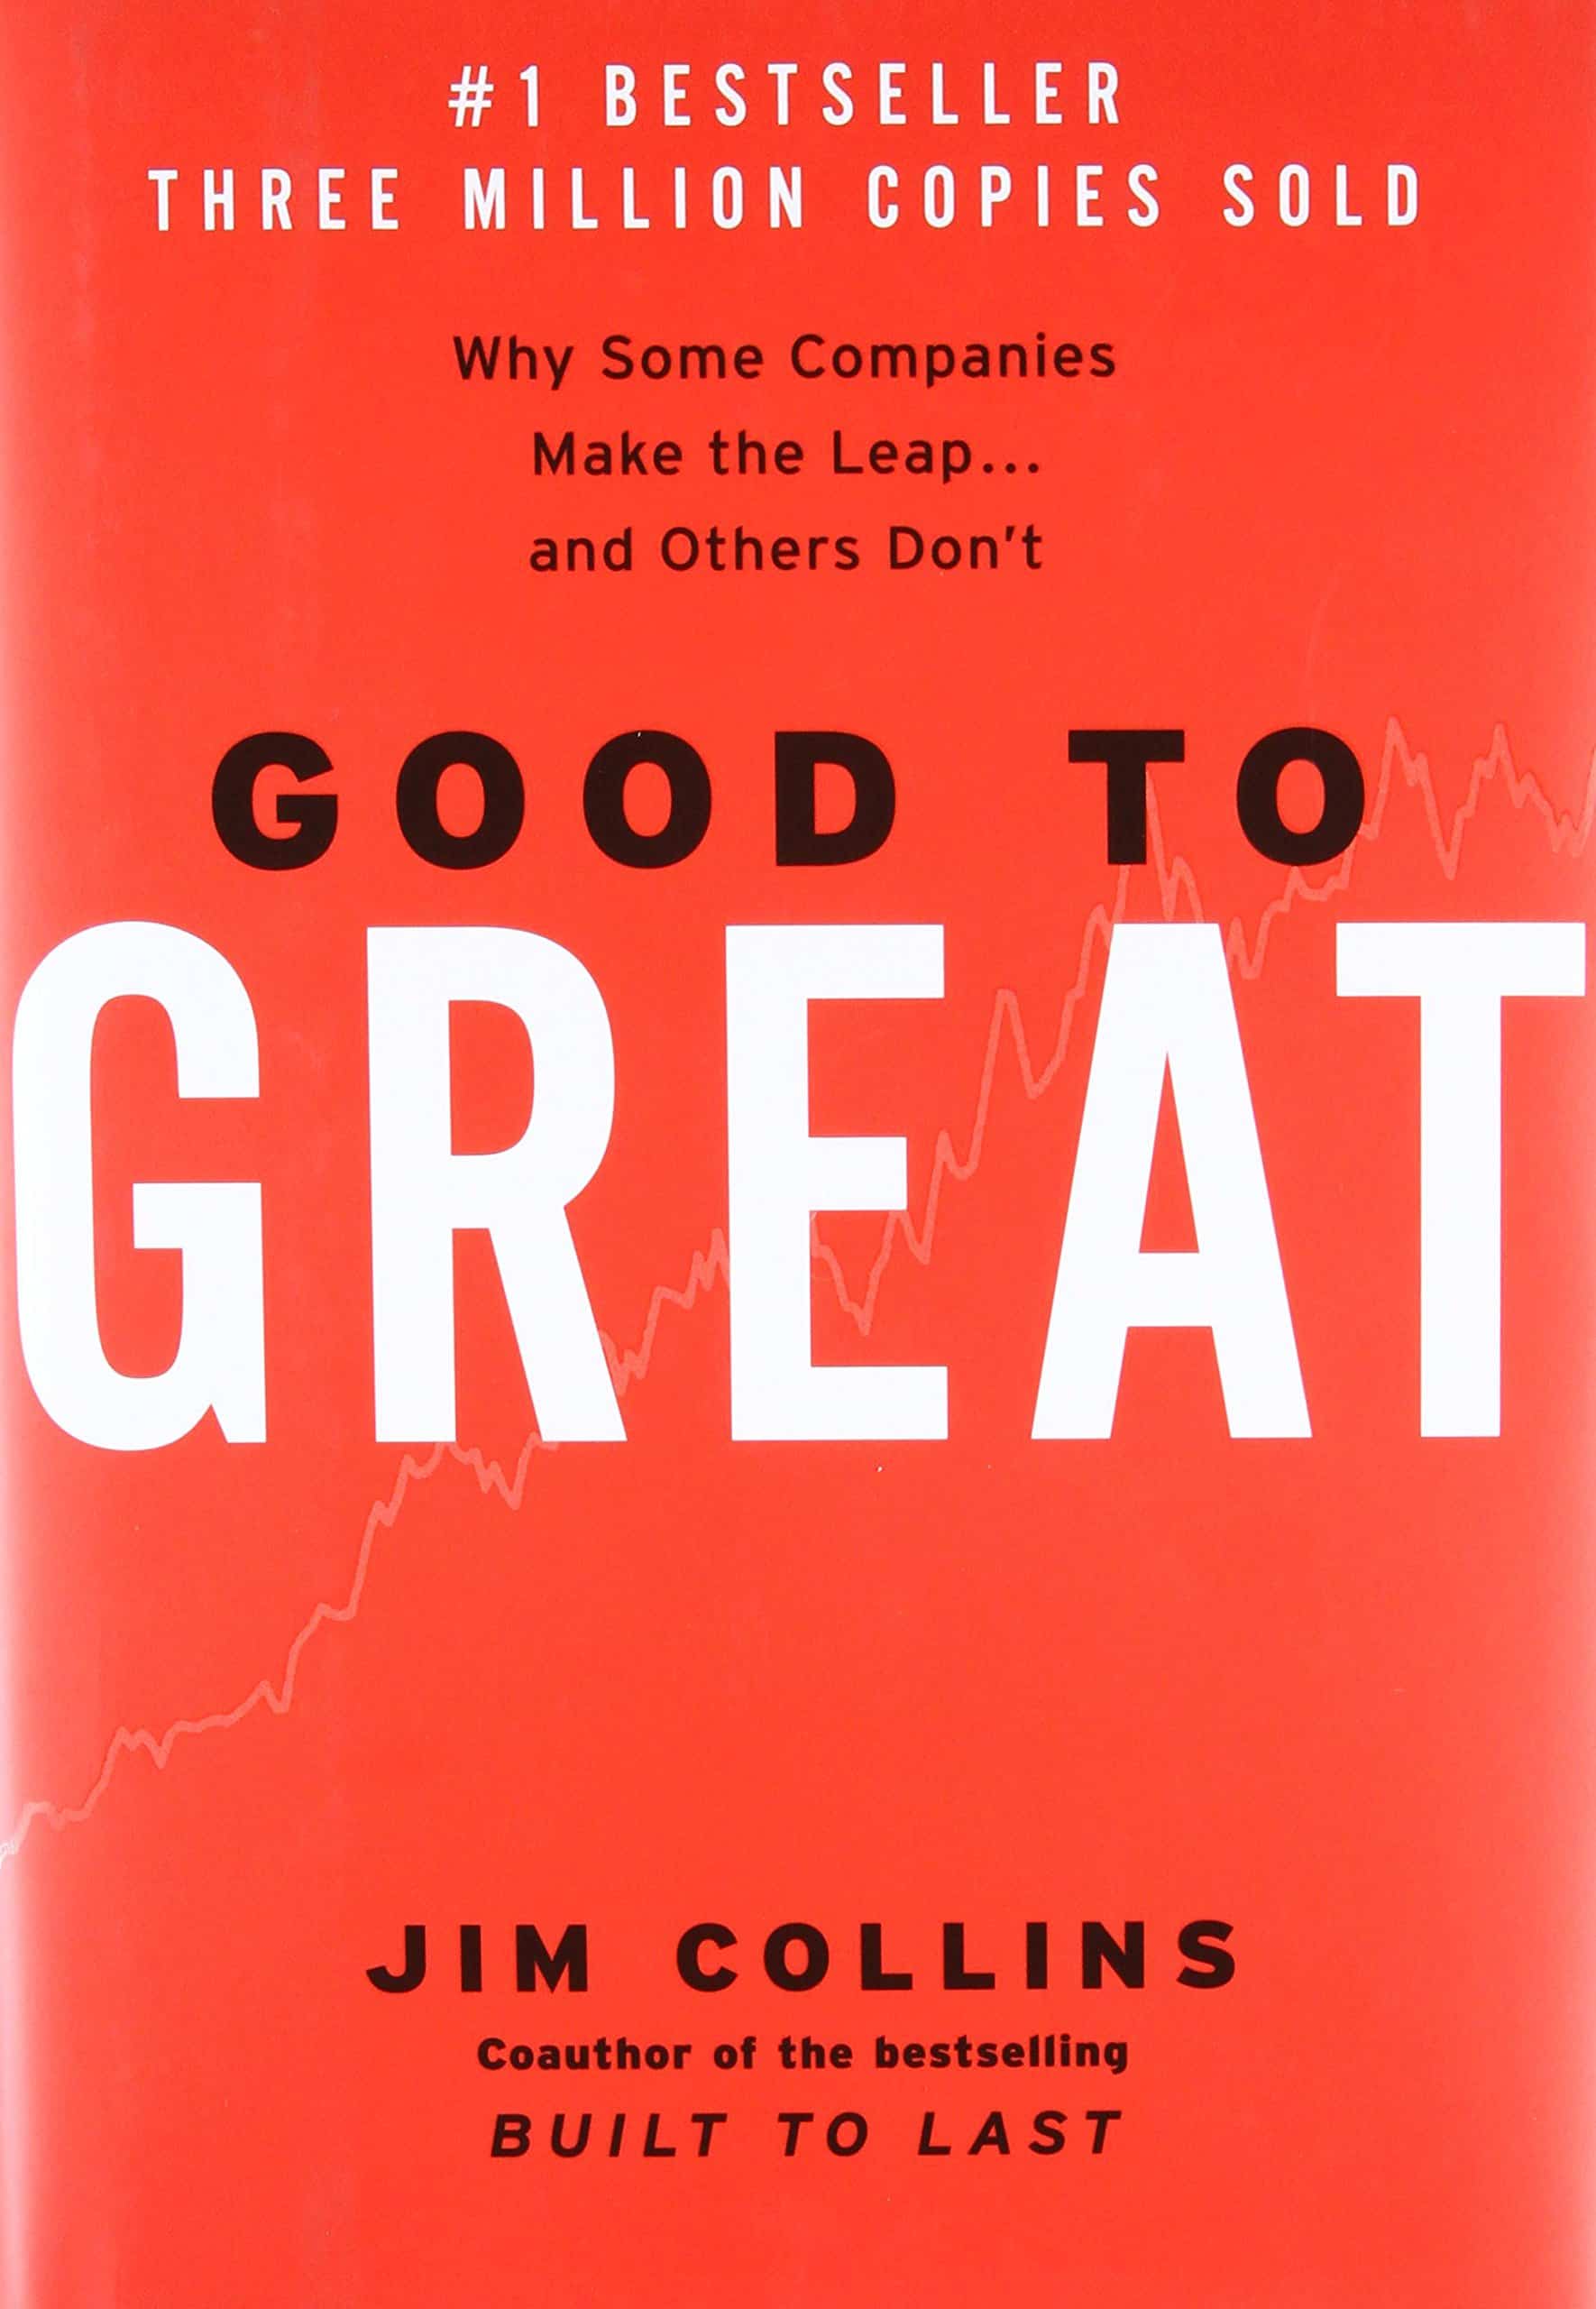 The cover of Good to Great